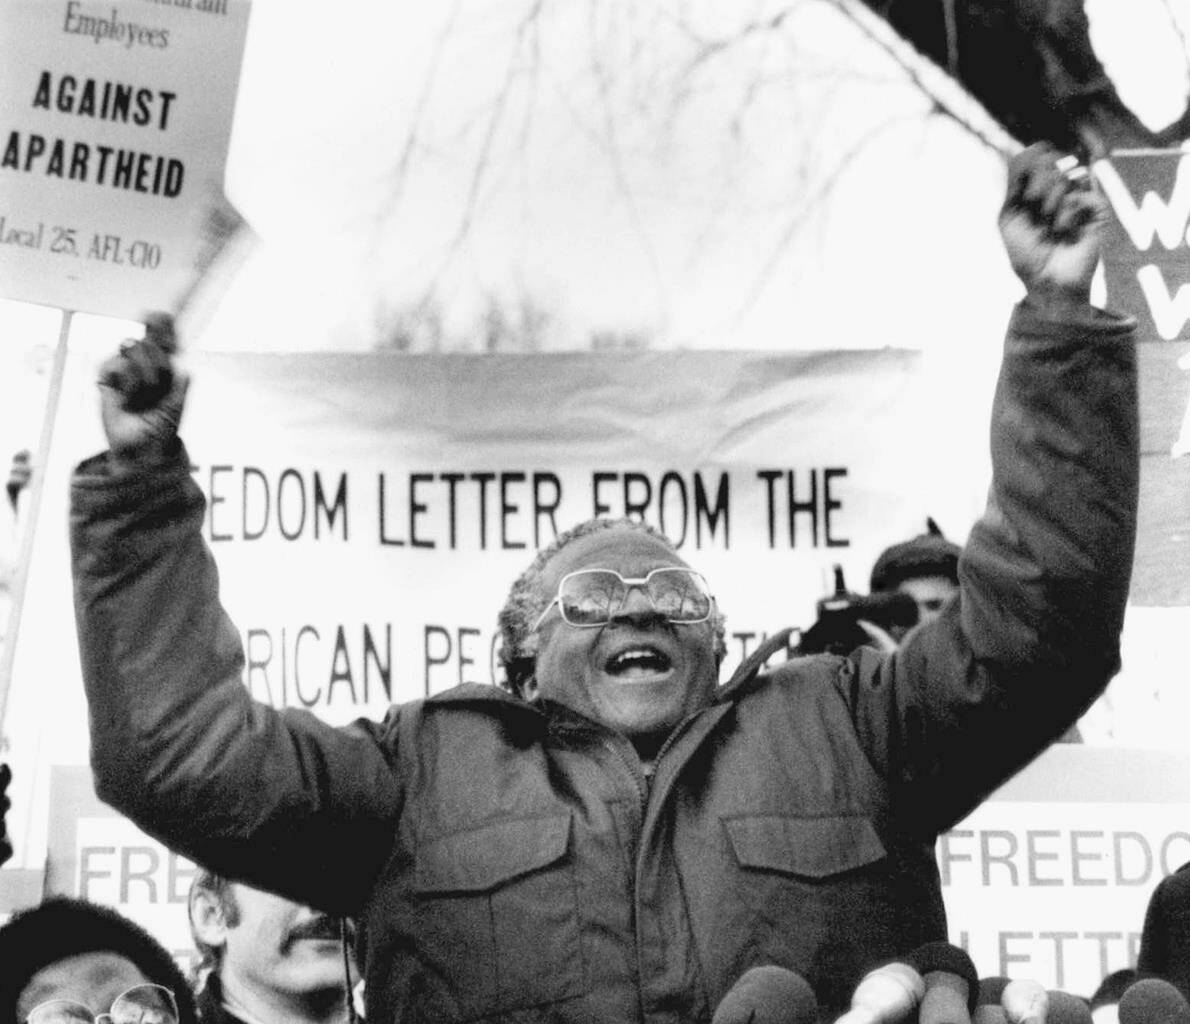 FILE - South African Bishop Desmond Tutu waves during a speech against apartheid, to a crowd of demonstrators, on Jan. 8, 1986, outside the South African Embassy in Washington. South Africa’s Nobel Peace Prize-winning activist for racial justice and LGBT rights and the retired Anglican Archbishop of Cape Town, has died at the age of 90, it was announced on Sunday, Dec. 26, 2021. An uncompromising foe of apartheid, South Africa’s brutal regime of oppression again the Black majority, Tutu worked tirelessly, but non-violently, for its downfall. (AP Photo/Dennis Cook, File)